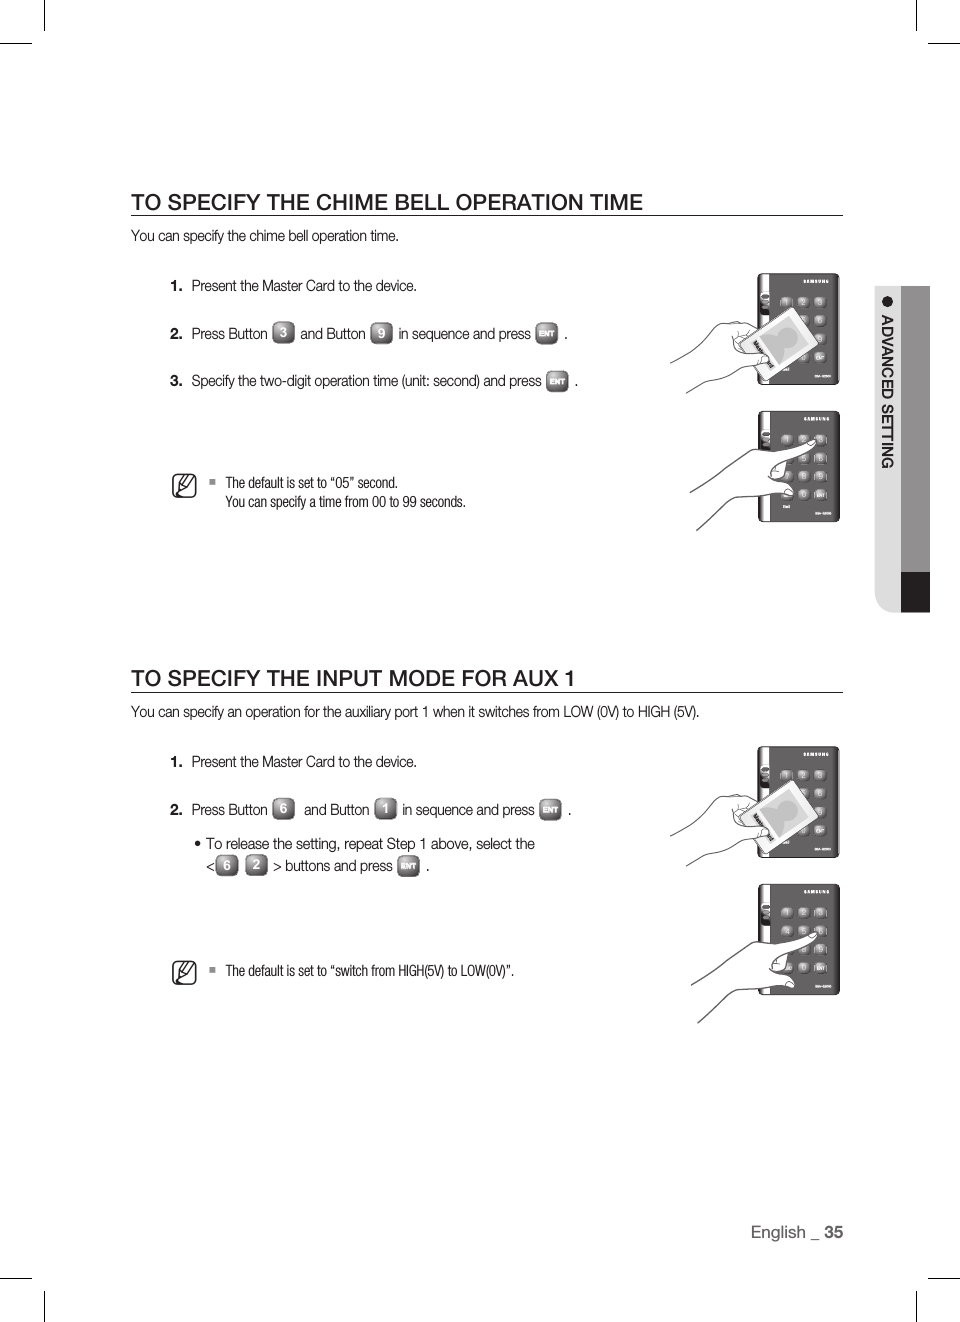 English _ 35ADVANCED SETTINGTO SPECIFY THE CHIME BELL OPERATION TIMEYou can specify the chime bell operation time.Present the Master Card to the device.Press Button 3and Button 9in sequence and press ENT.Specify the two-digit operation time (unit: second) and press ENT.The default is set to “05” second.You can specify a time from 00 to 99 seconds.TO SPECIFY THE INPUT MODE FOR AUX 1You can specify an operation for the auxiliary port 1 when it switches from LOW (0V) to HIGH (5V).Present the Master Card to the device.Press Button 6 and Button 1in sequence and press ENT.To release the setting, repeat Step 1 above, select the &lt;62&gt; buttons and press ENT.The default is set to “switch from HIGH(5V) to LOW(0V)”.1.2.3.M1.2.•MX Y Z[ \ ]^ _ `lzj lu{WizzhTzYWWWtGjX Y Z[ \ ]^ _ `lzj lu{WizzhTzYWWWX Y Z[ \ ]^ _ `lzj lu{WizzhTzYWWWtGjX Y Z[ \ ]^ _ `lzj lu{WizzhTzYWWW